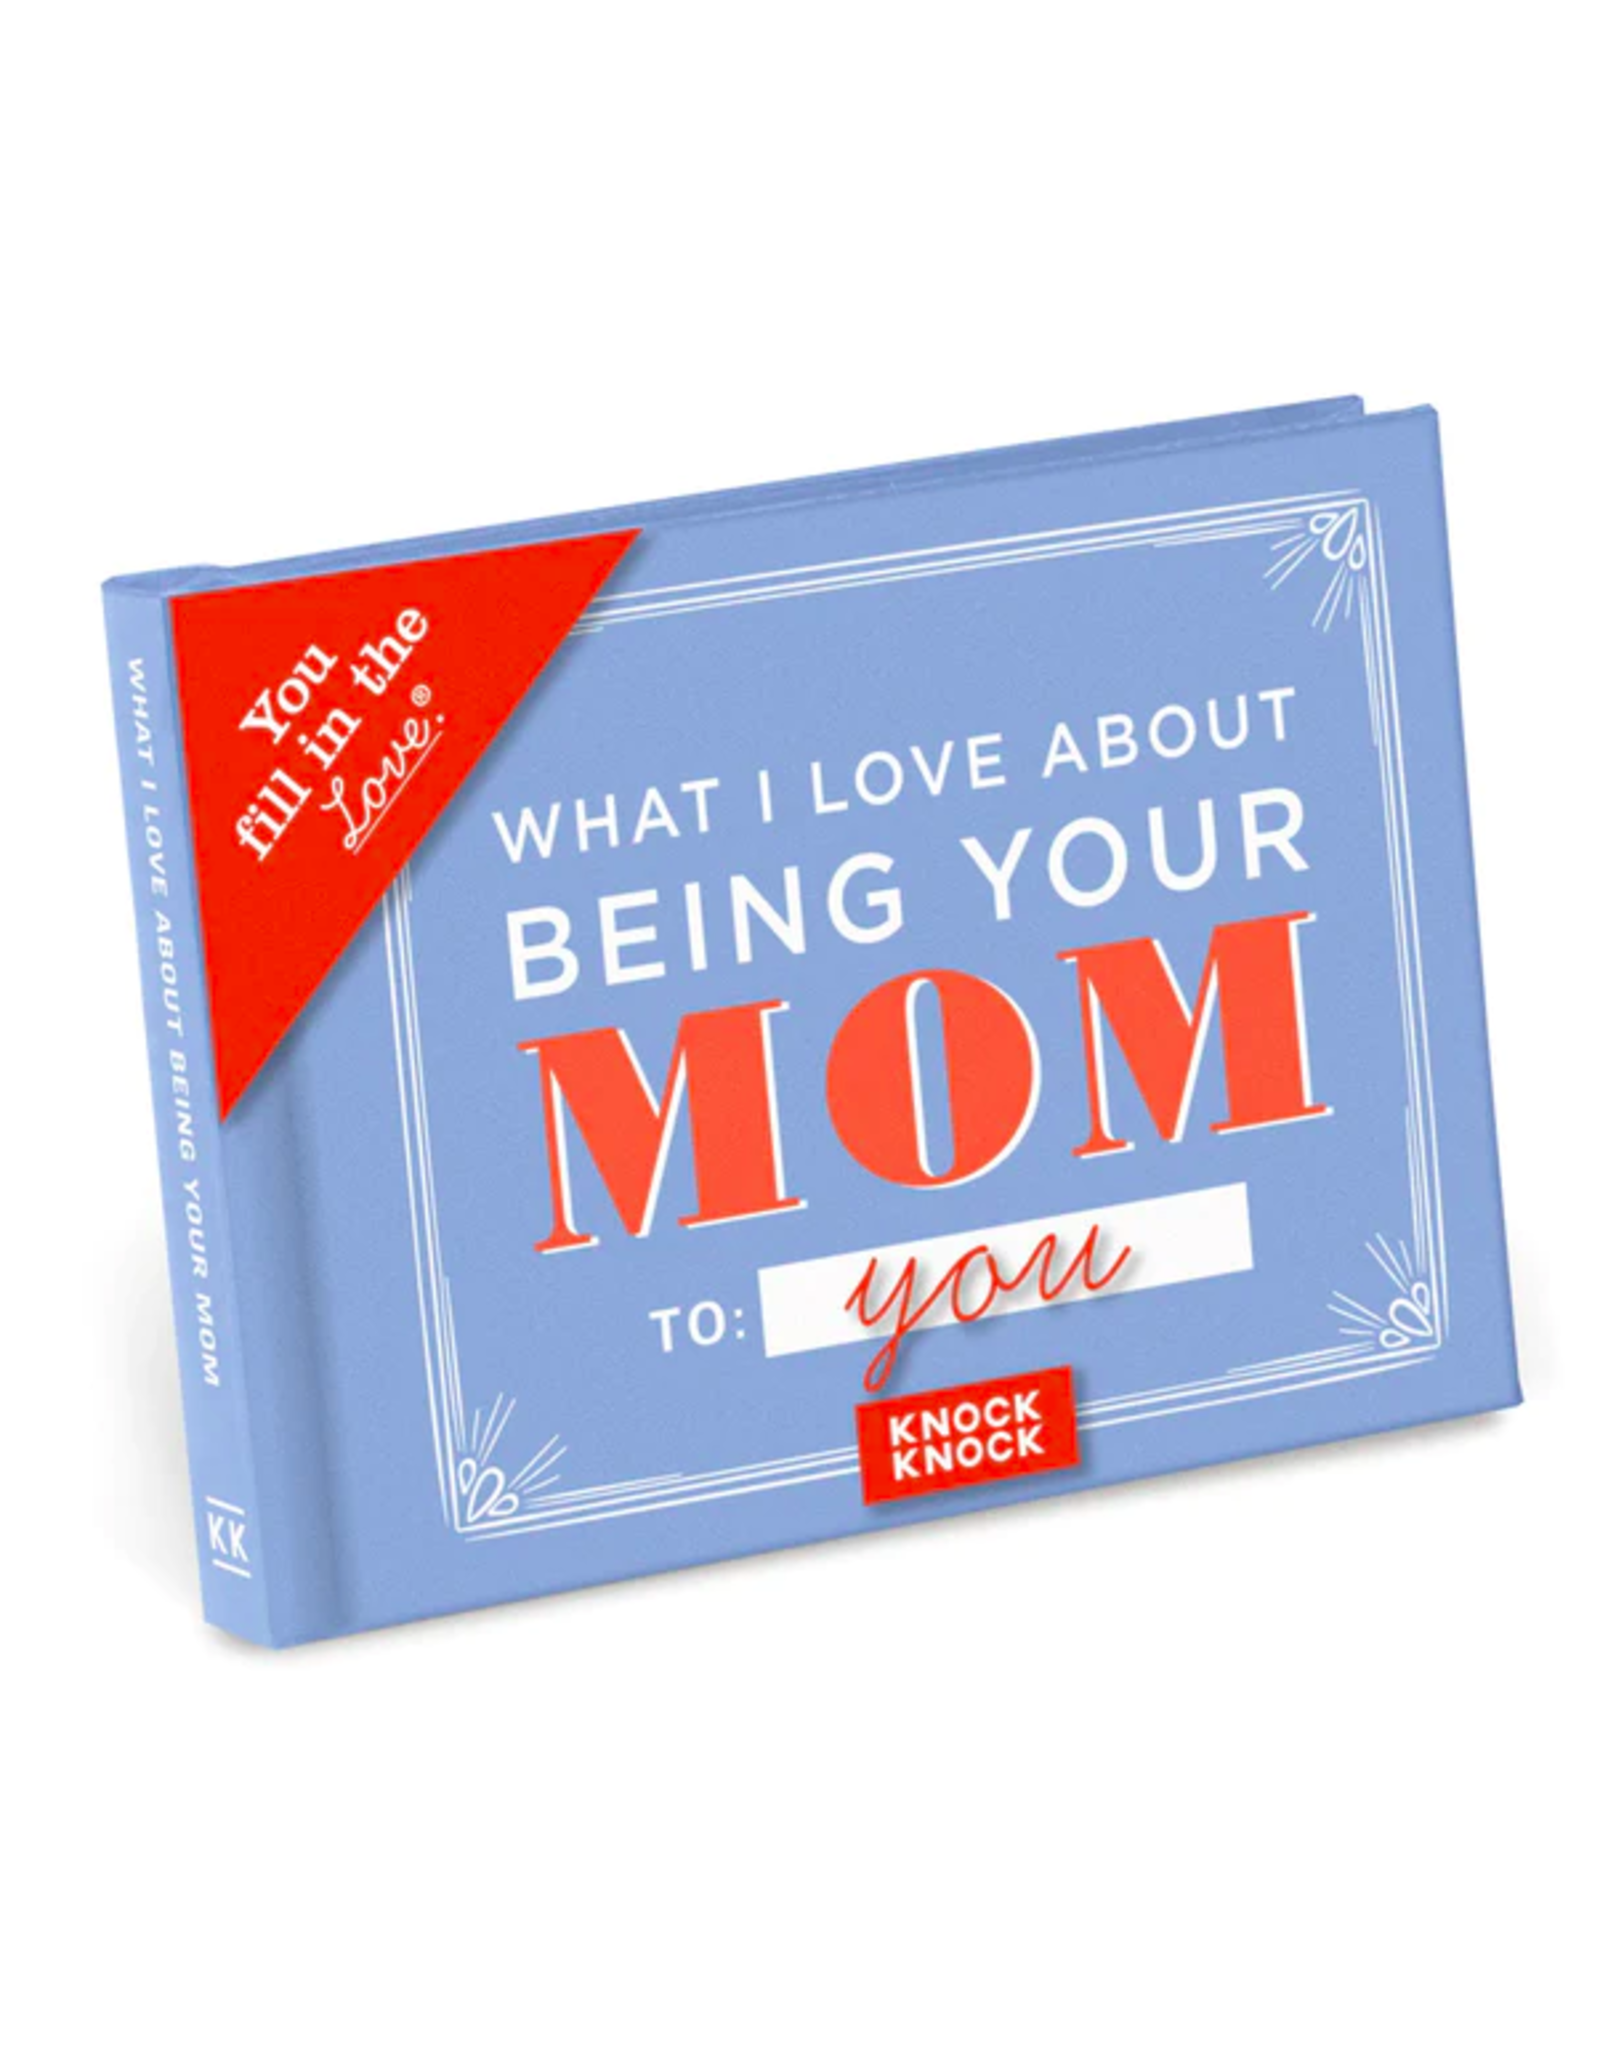 https://cdn.shoplightspeed.com/shops/640817/files/50335684/1600x2048x2/knock-knock-what-i-love-about-being-your-mom-book.jpg